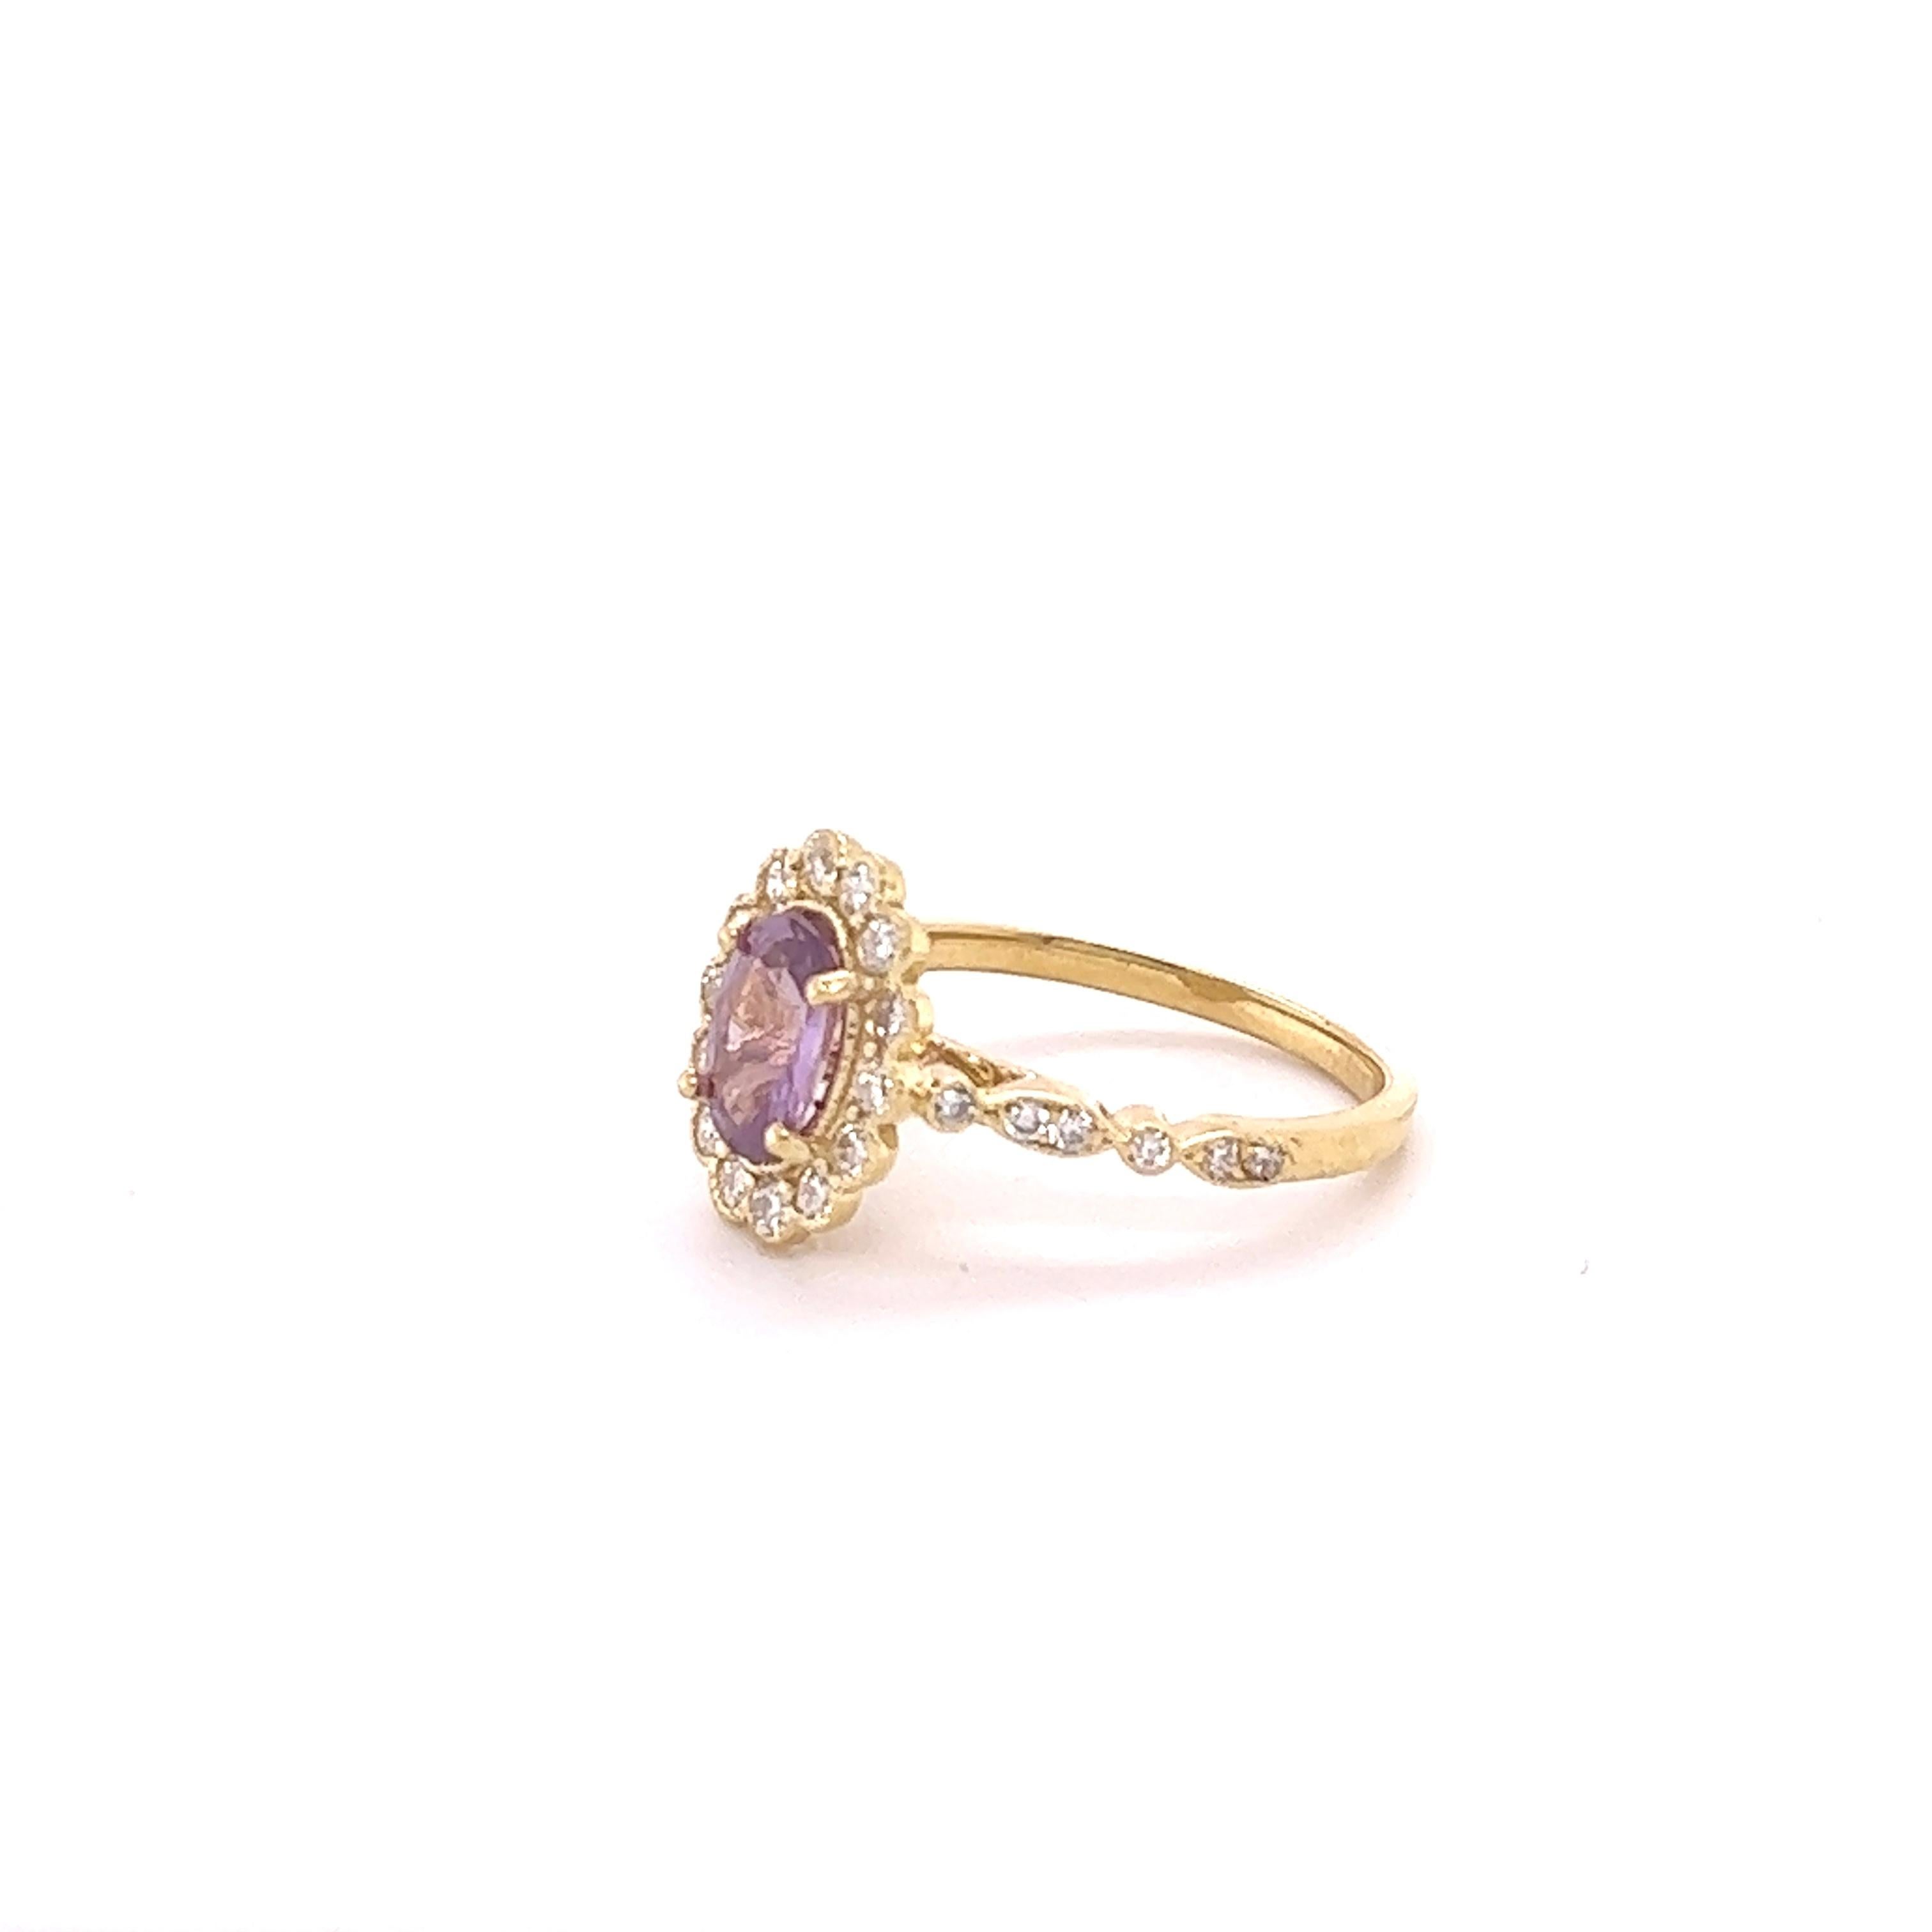 Contemporary GIA Certified 1.71 Carat Pink Sapphire Diamond Yellow Gold Engagement Ring For Sale